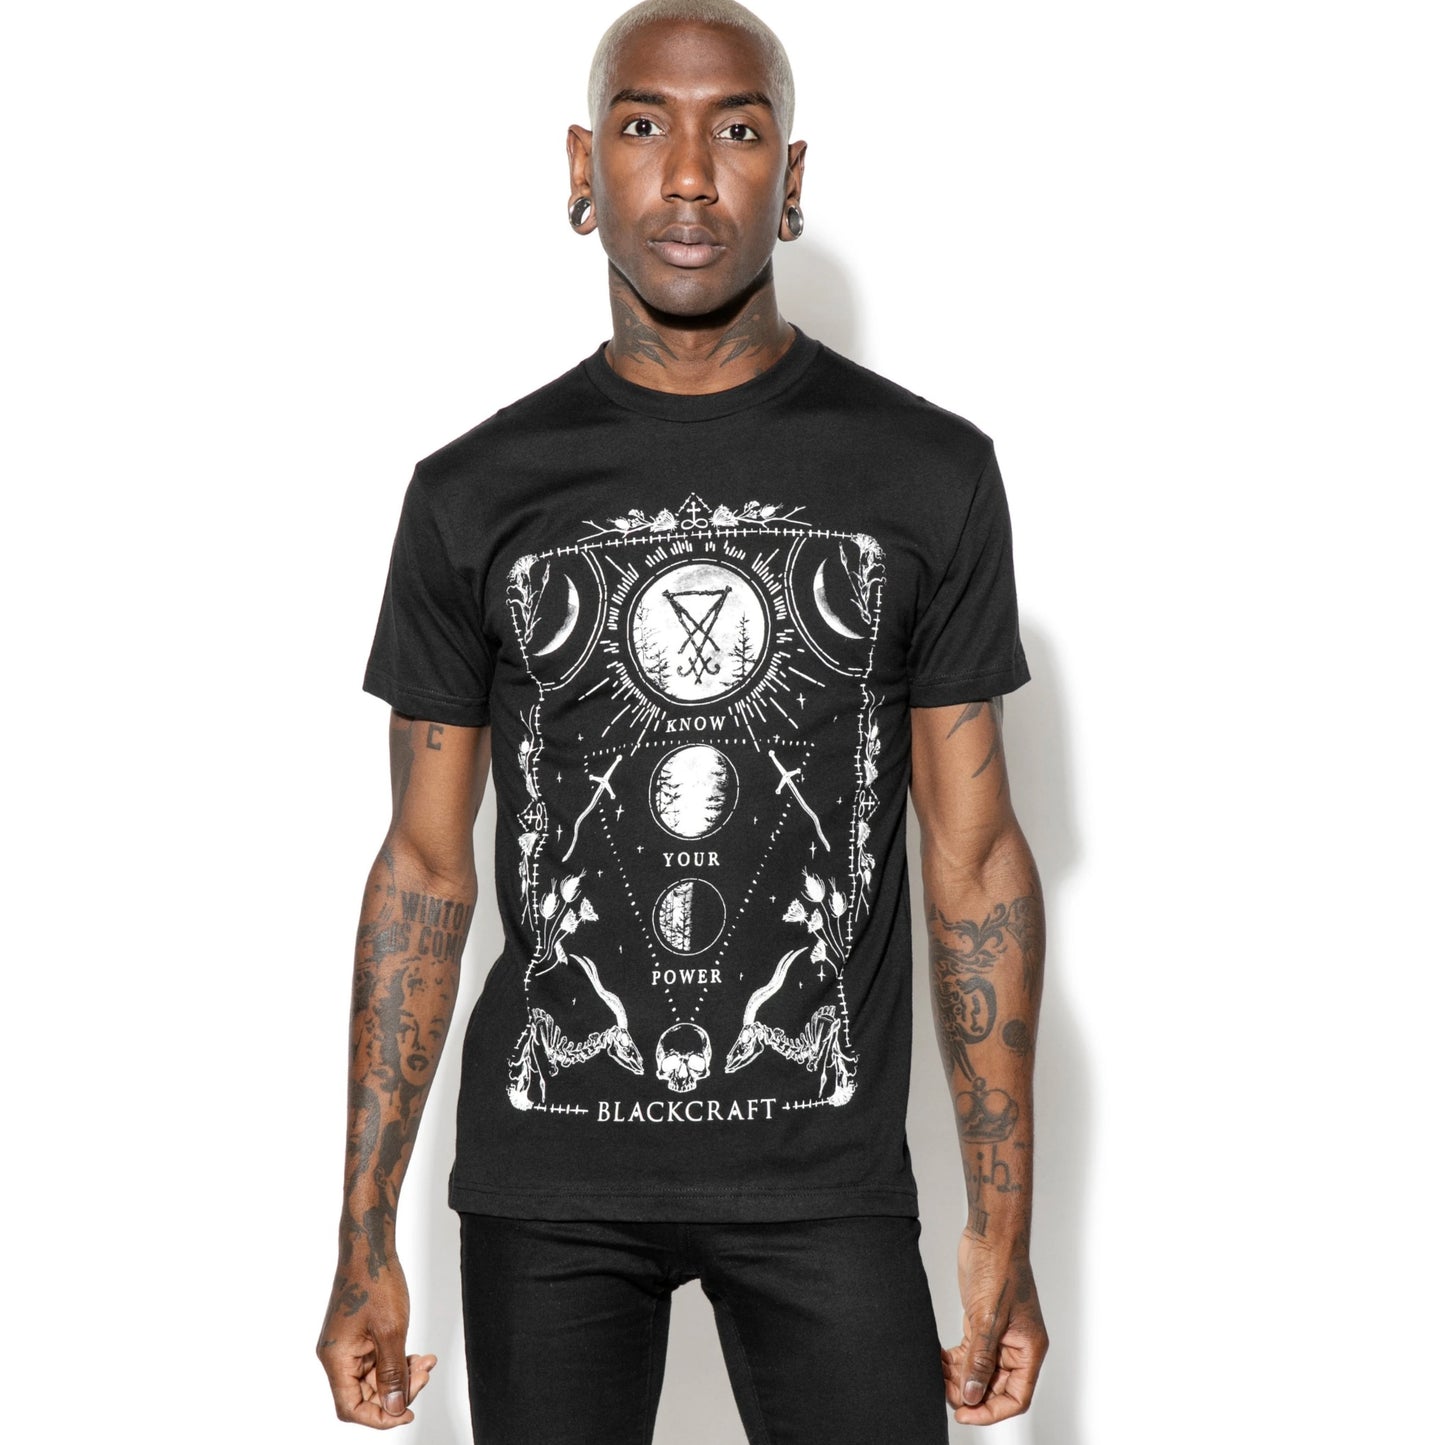 Men's T-Shirt | Know Your Power | 100% Cotton Black Tee - Blackcraft Cult - Shirts